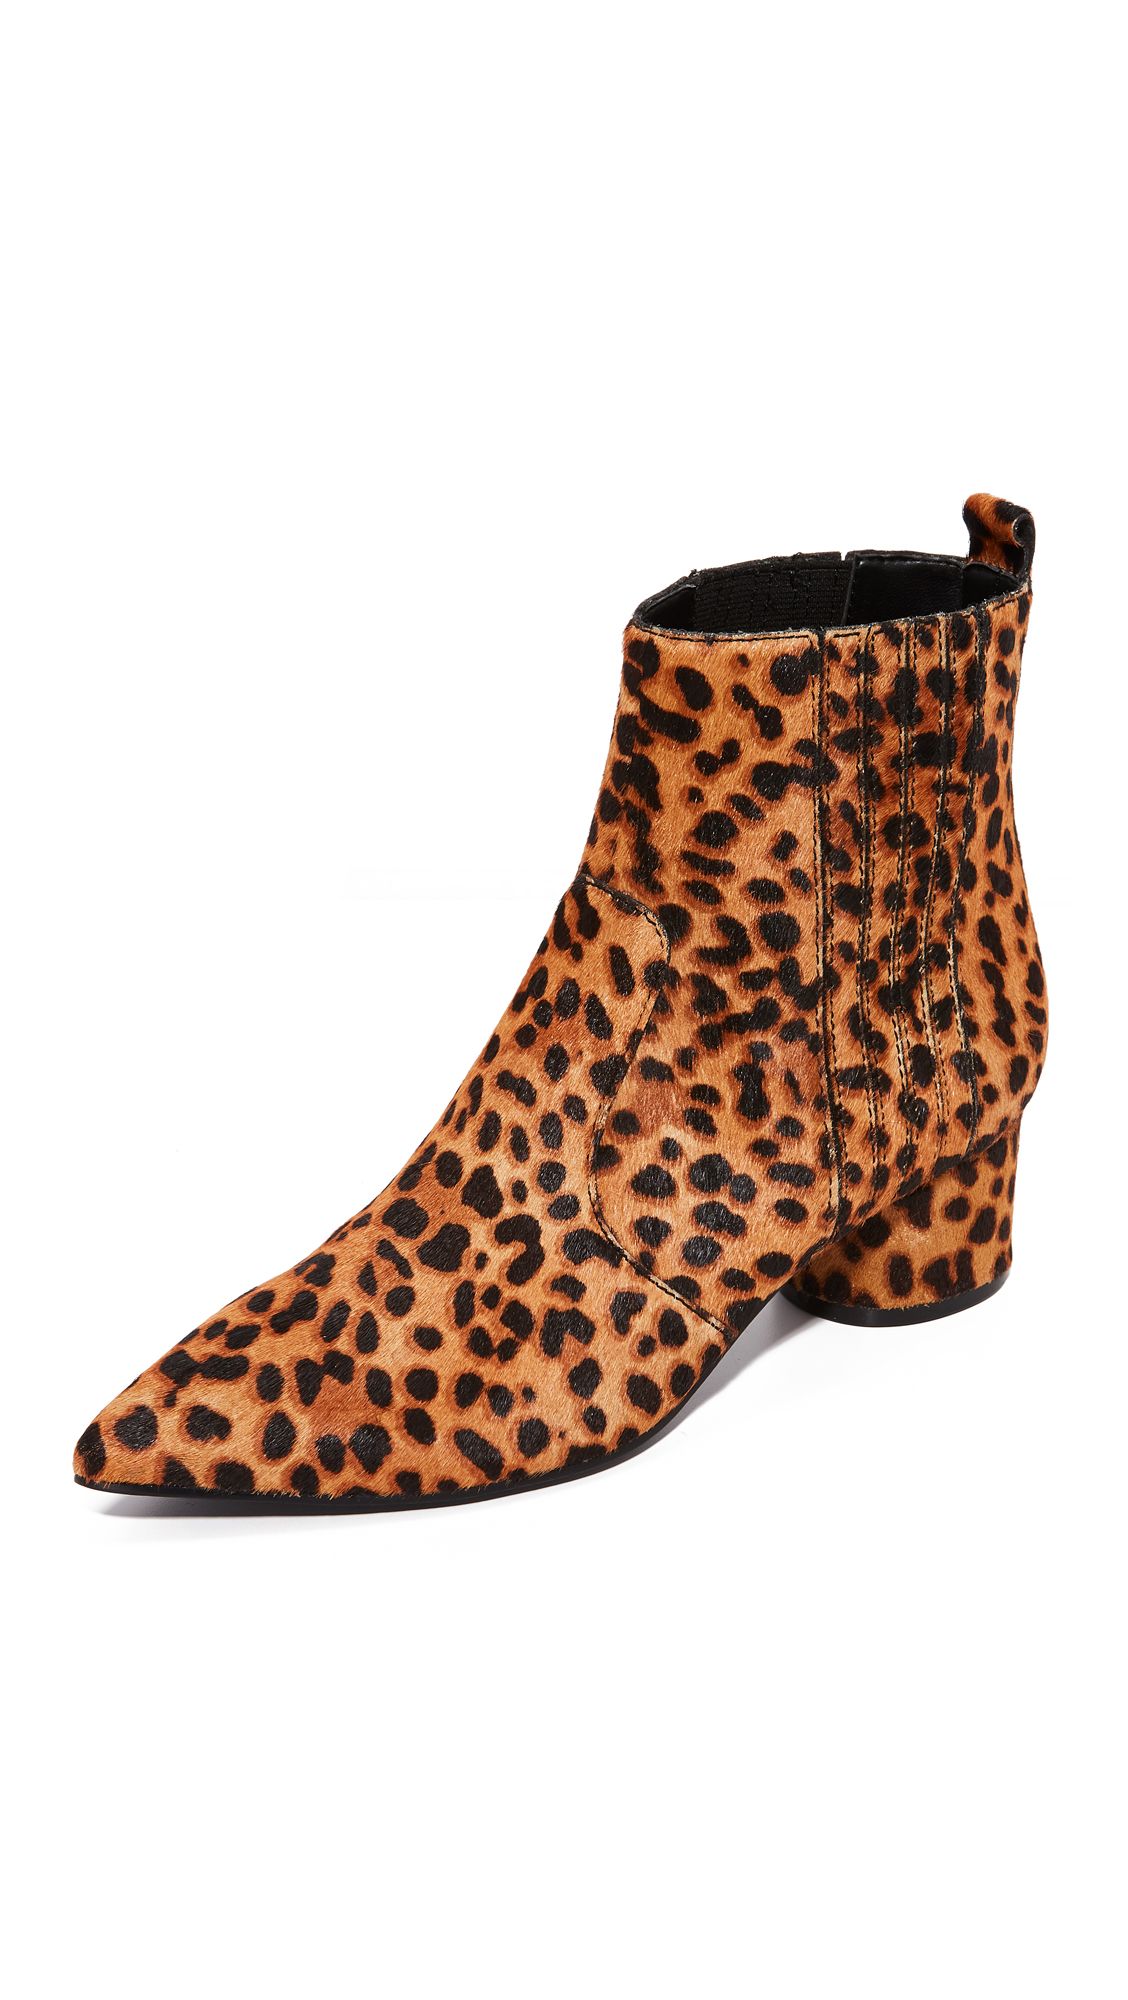 KENDALL + KYLIE Lacely Leopard Booties | Shopbop